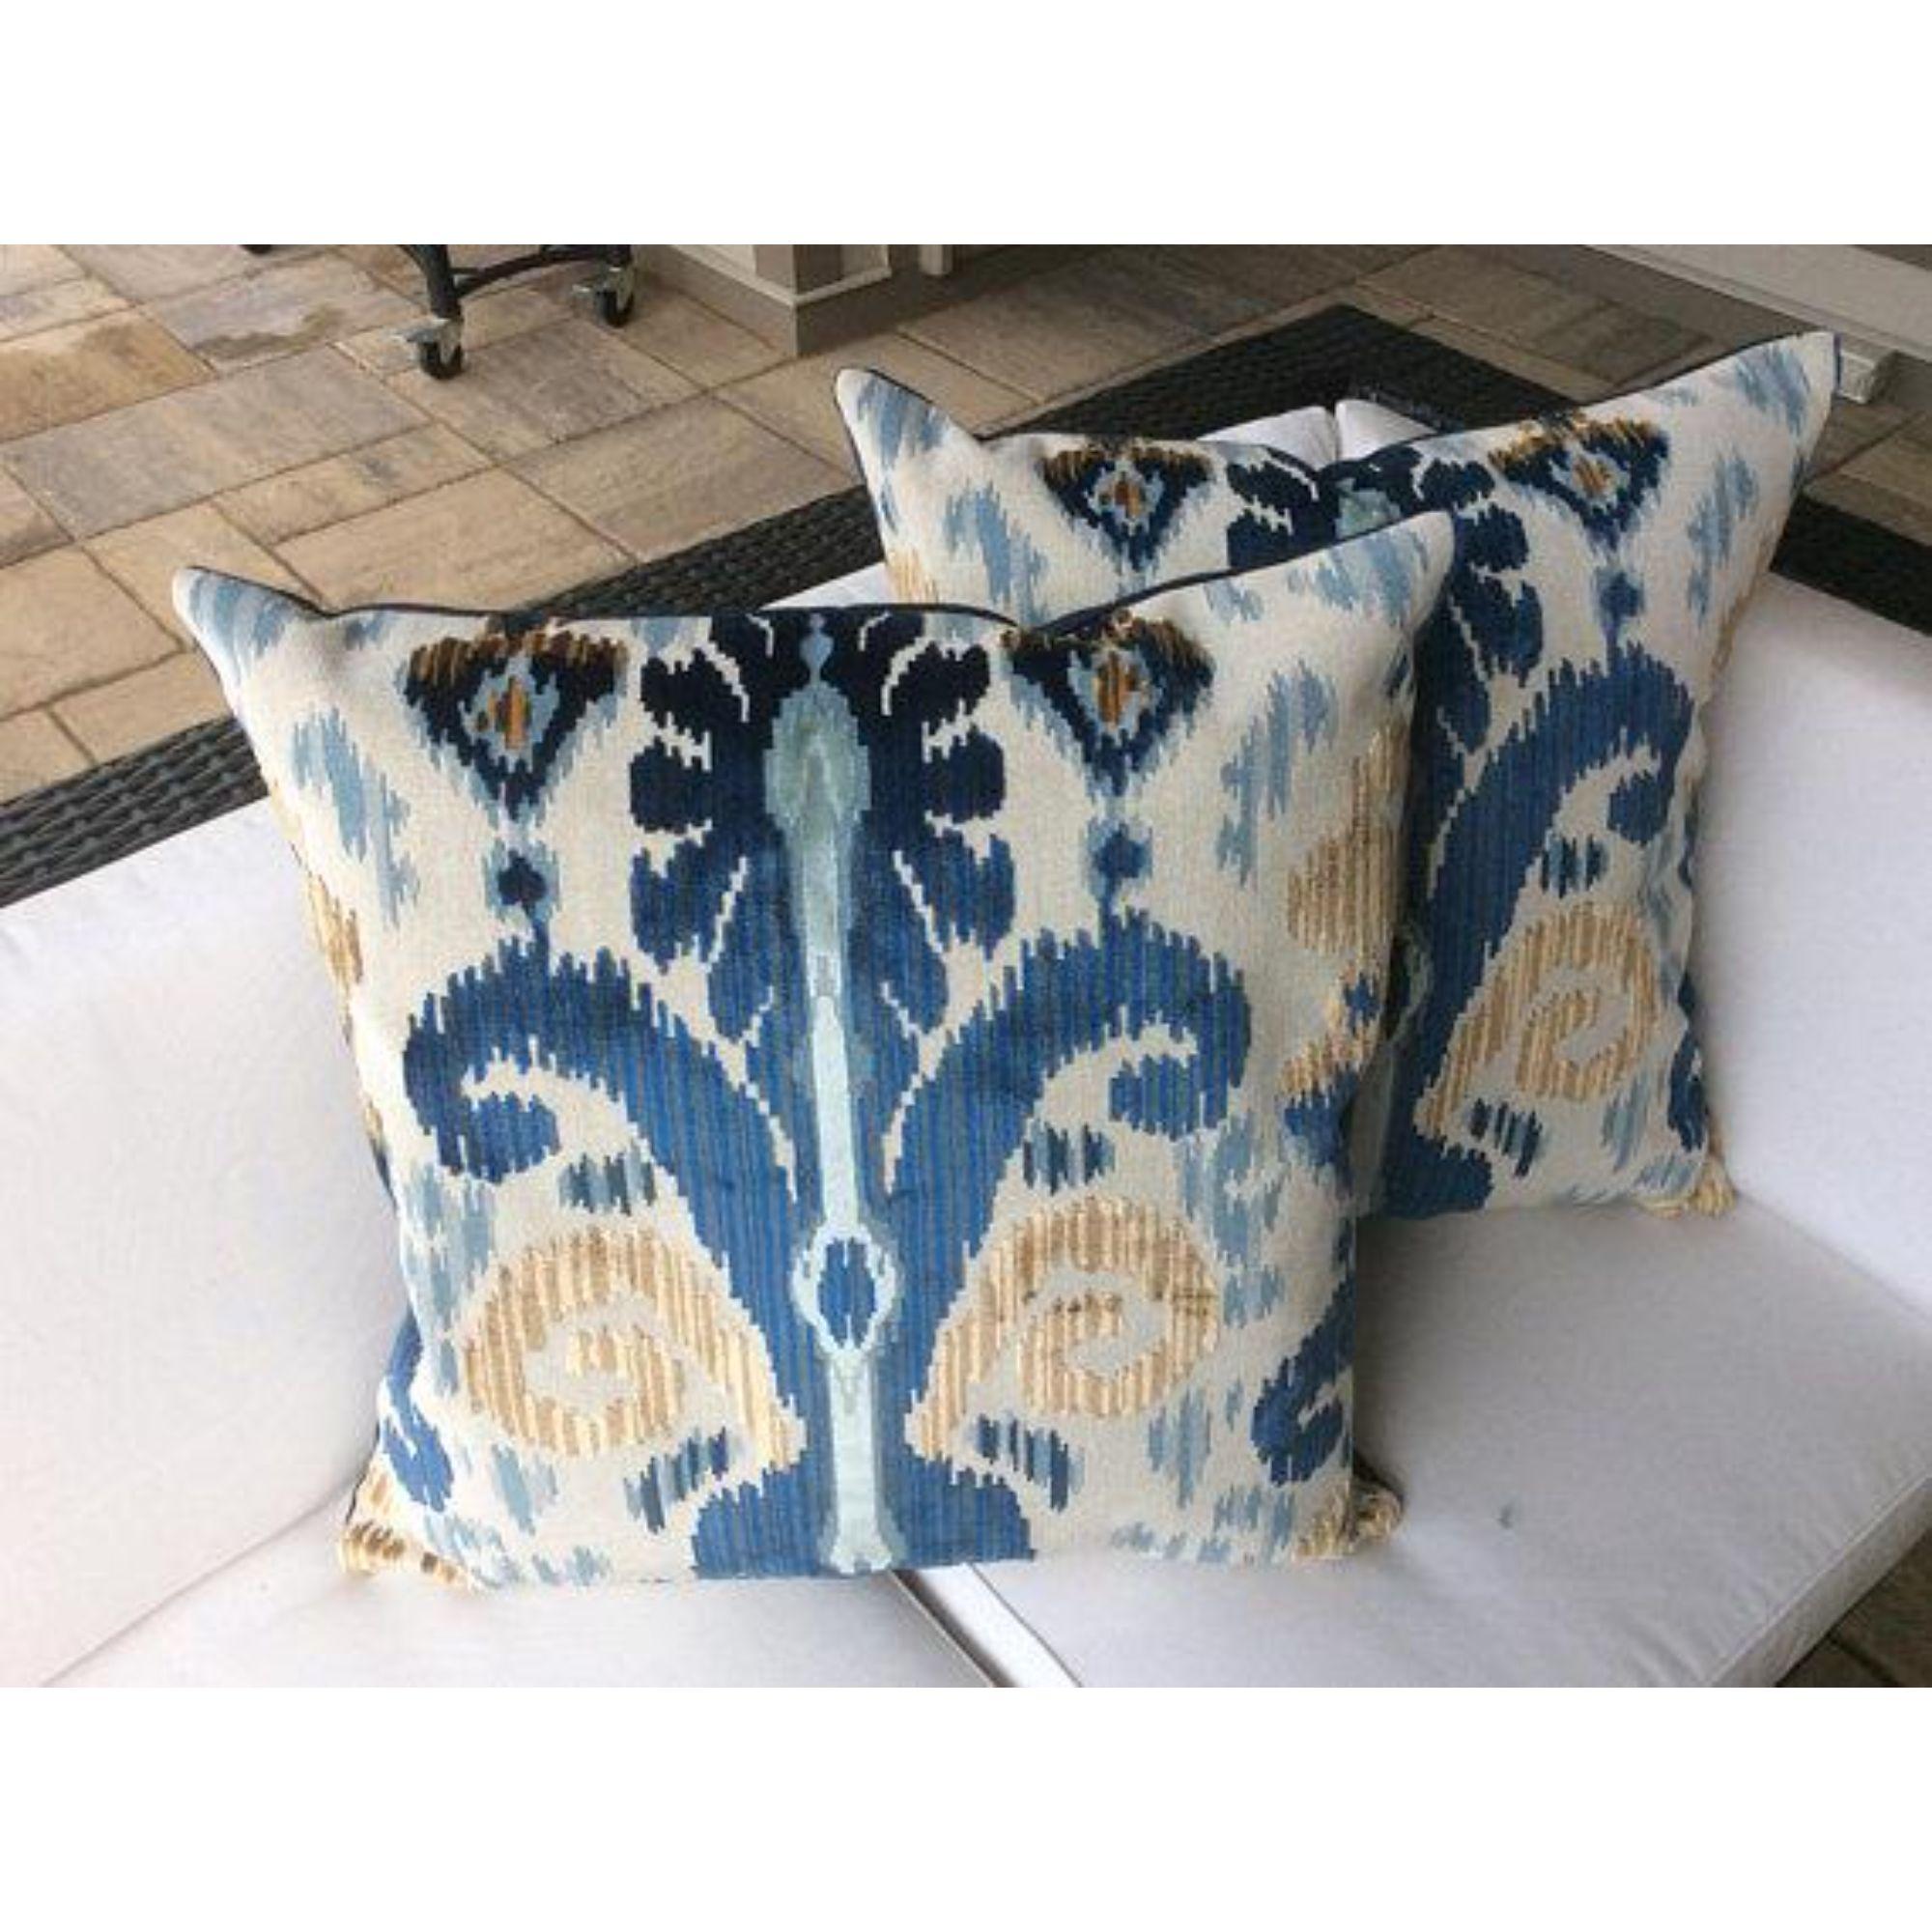 Stunningly beautiful Belgian cut velvet from esteemed Lee Jofa, this Ikat design is rich, intricate, and saturated with colors of cobalt blue and golden tan on white. This pair of pillows is corded and backed in cobalt blue velvet.

These handmade